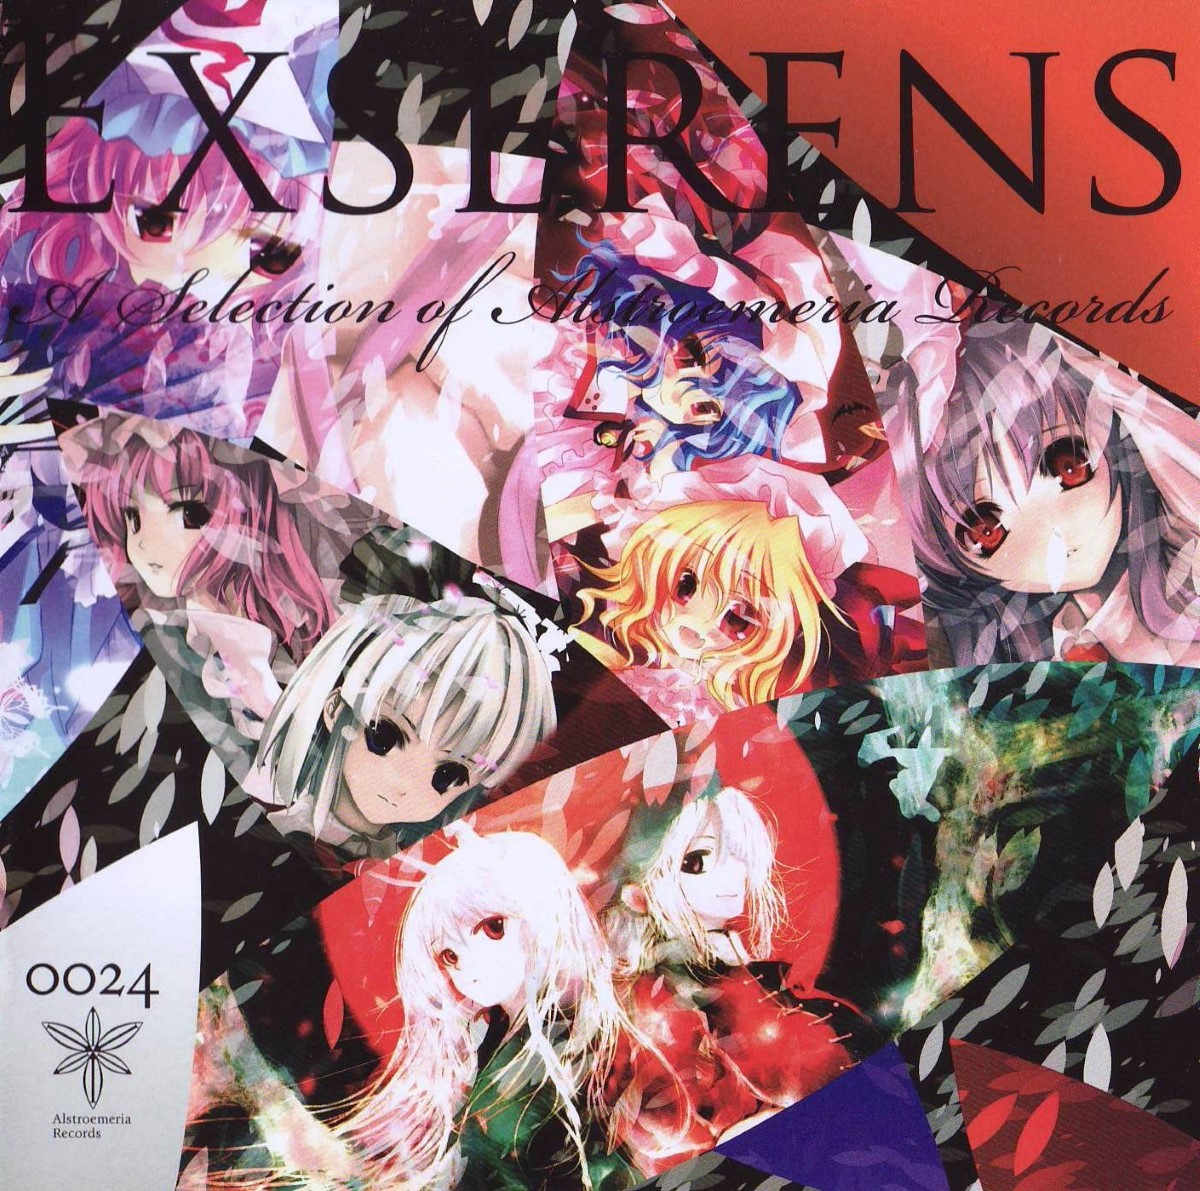 Lovelight」Alstroemeria Records 東方プロジェクト - キャラクターグッズ